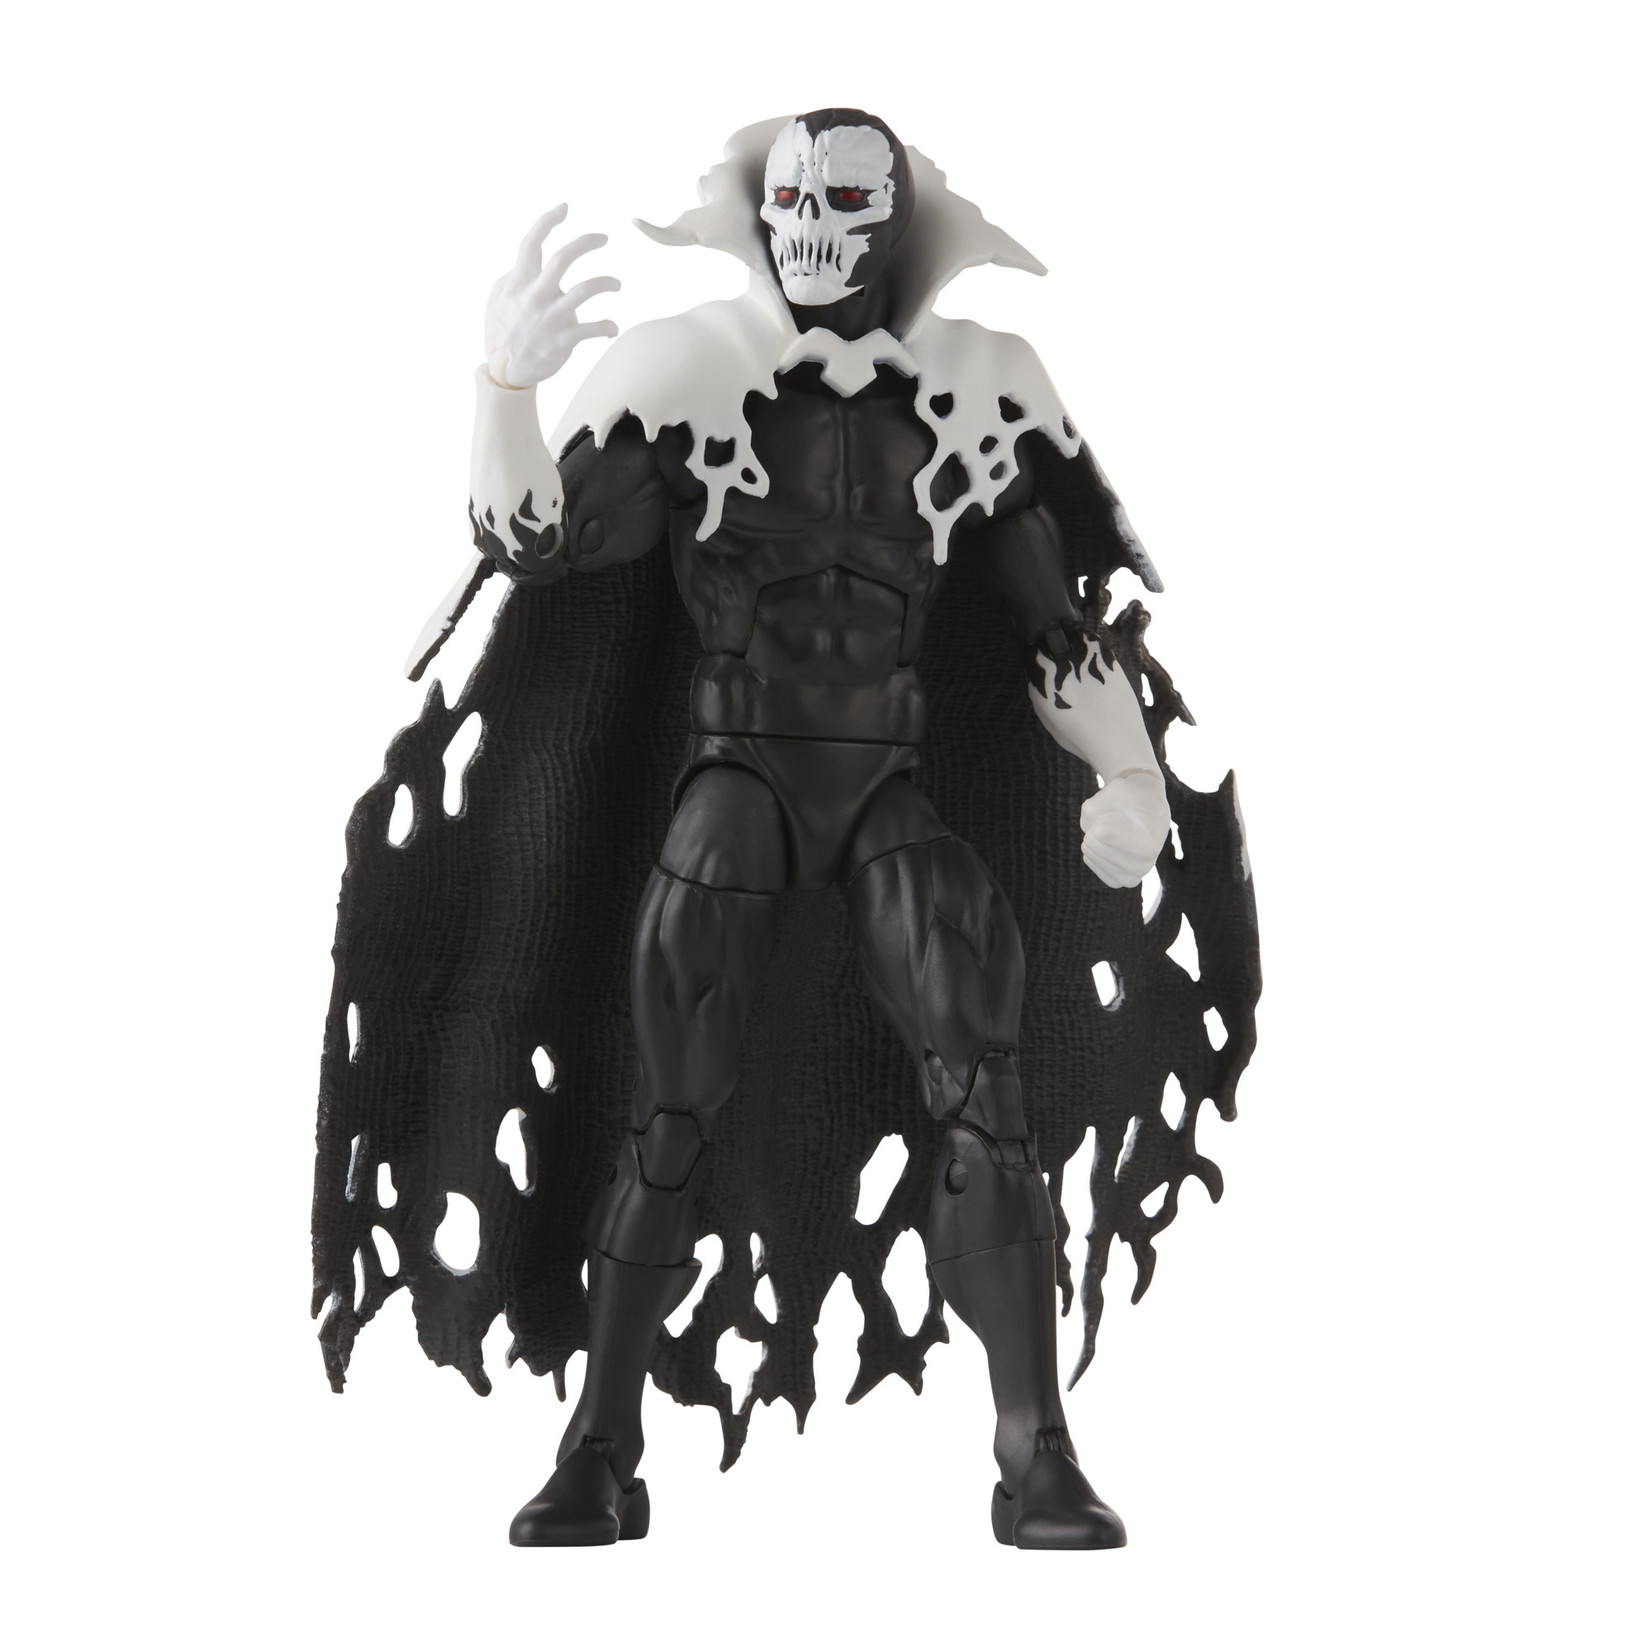 Hasbro MARVEL LEGENDS SERIES DOCTOR STRANGE IN THE MULTIVERSE OF MADNESS 6-INCH COLLECTIBLE D’SPAYRE ACTION FIGURE